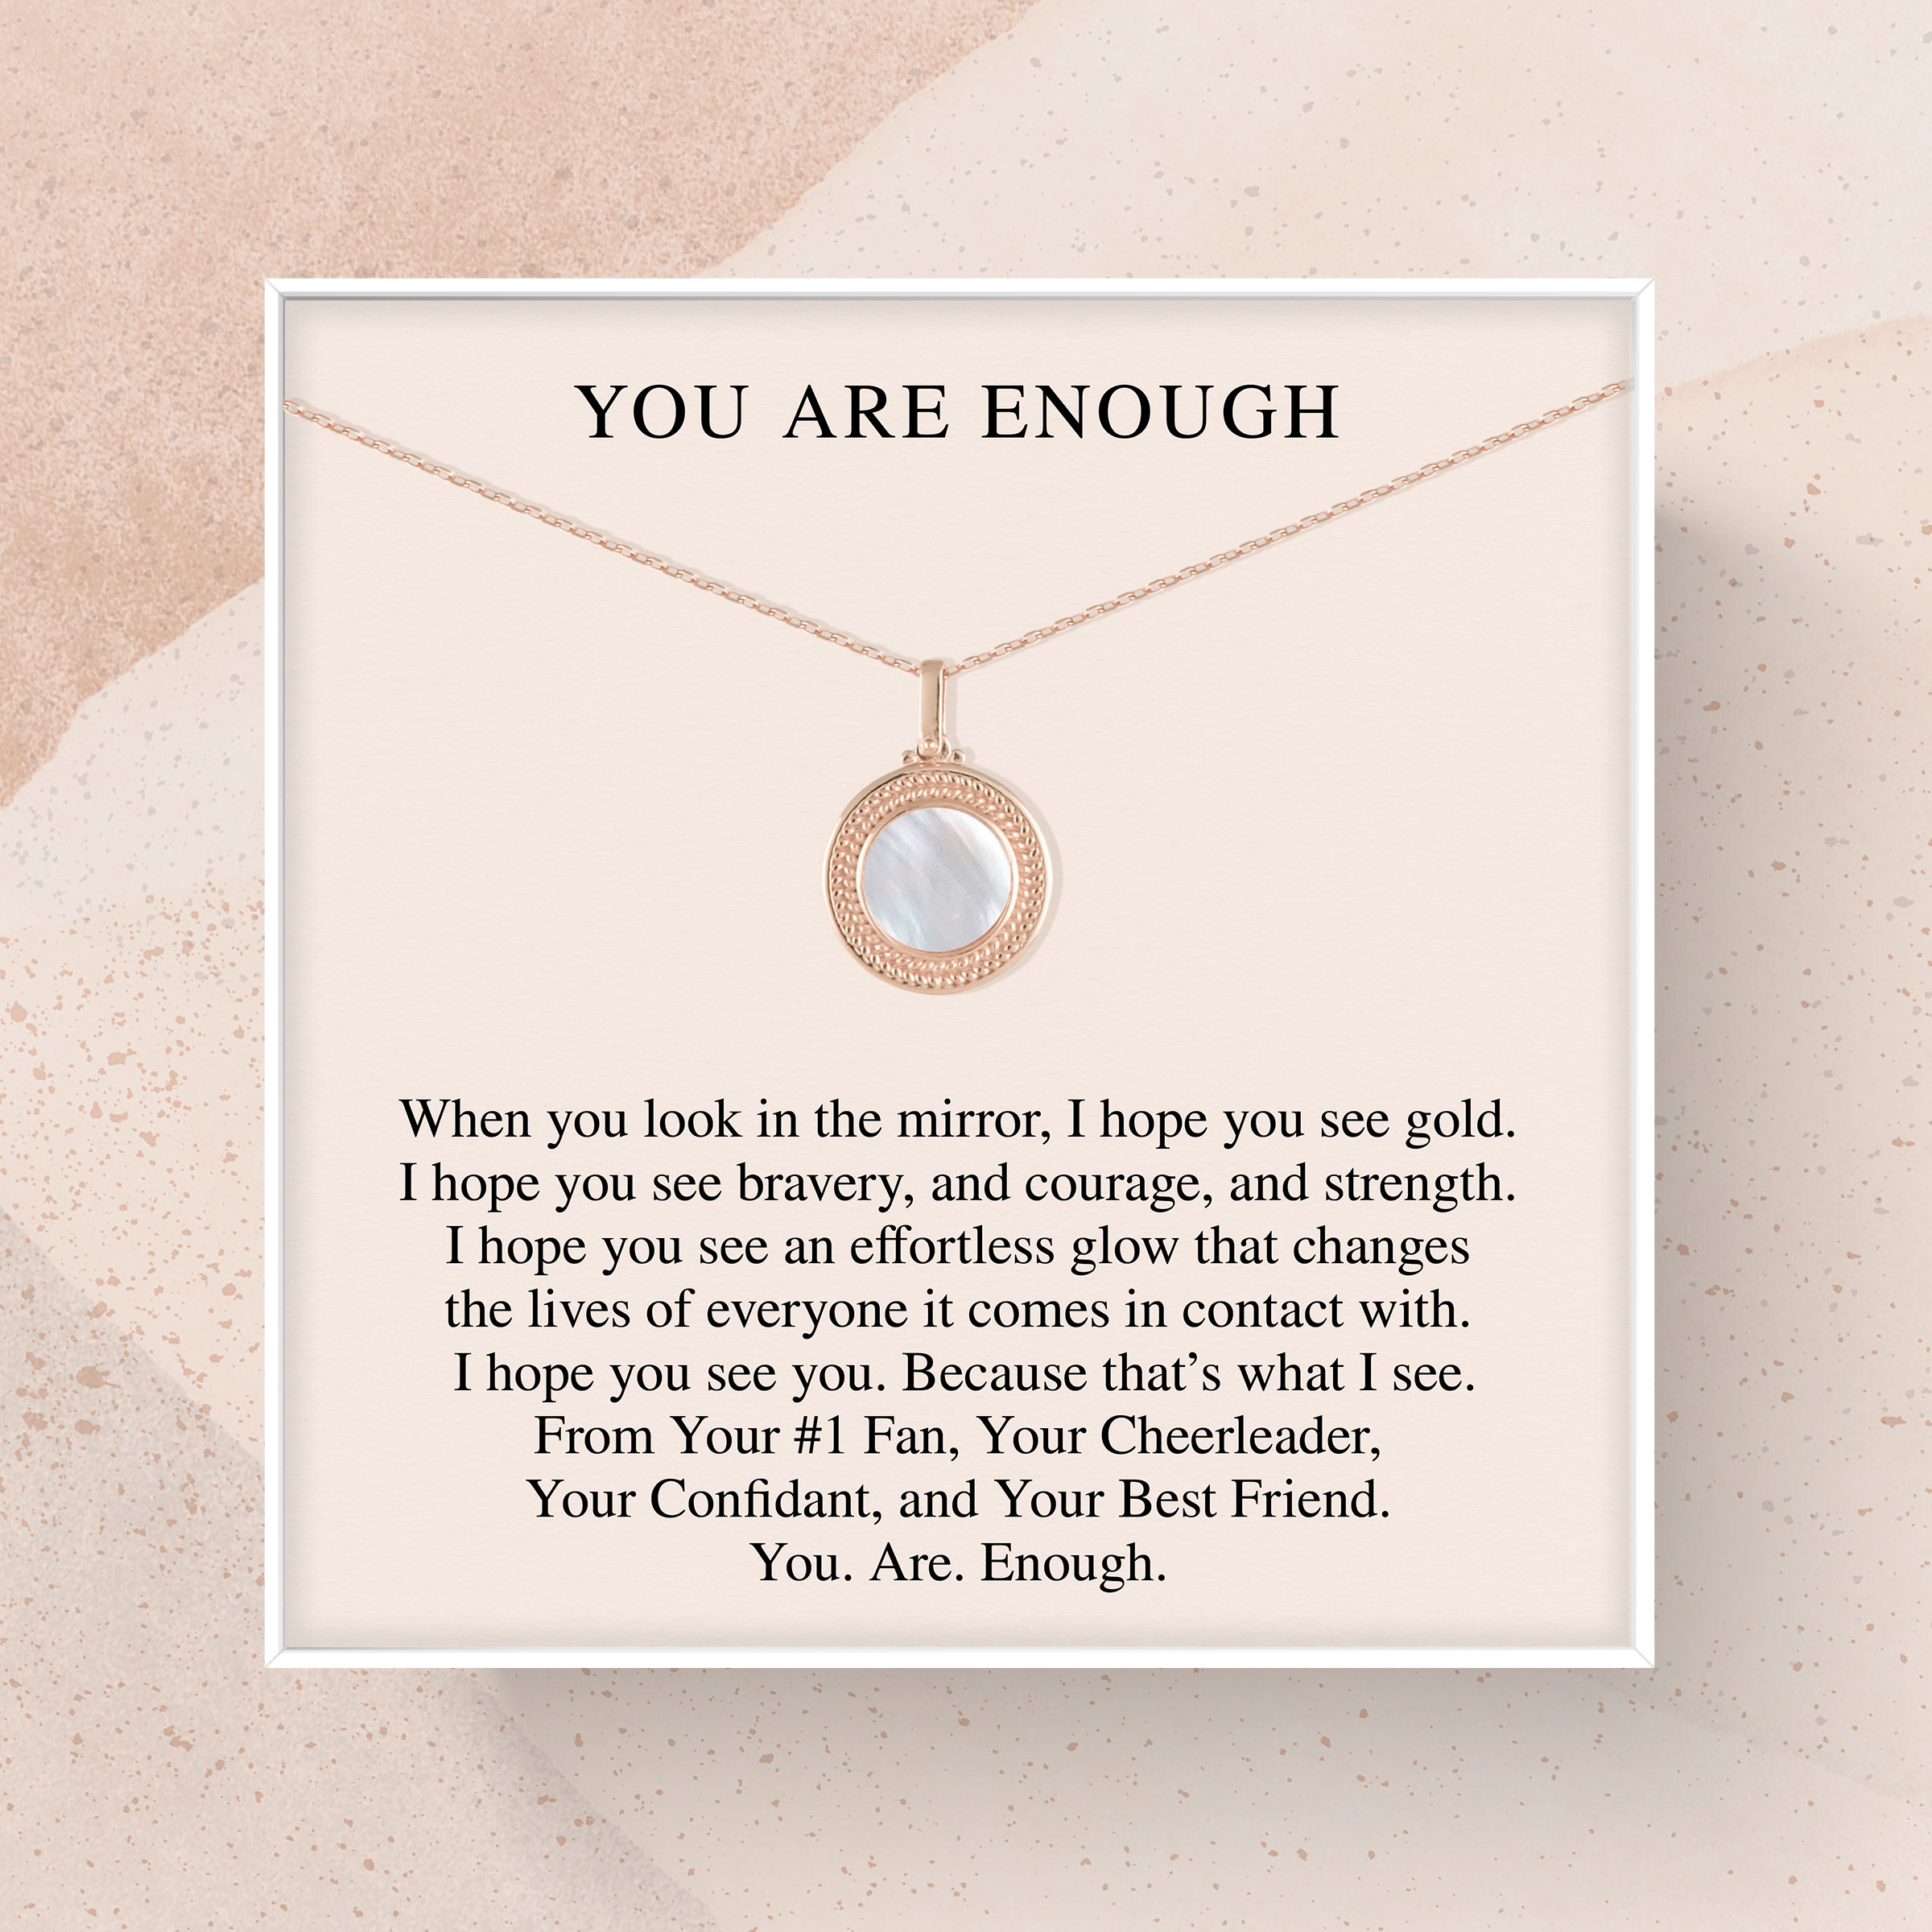 Bestseller You Are Enough Necklace Birthday Gift For Friend Etsy